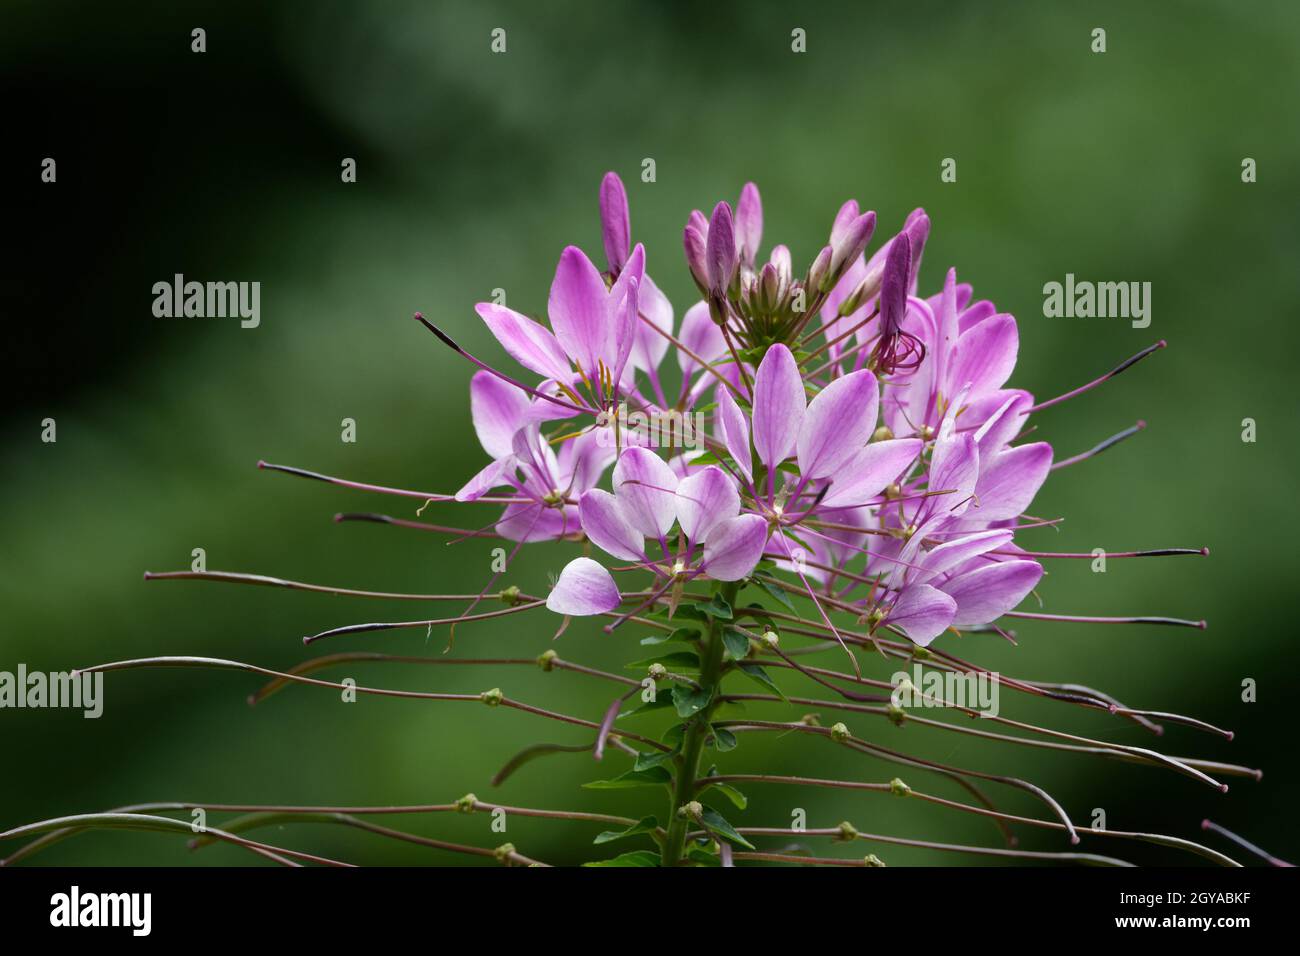 cleome hassleriana, pink spider flower against blurred green background Stock Photo